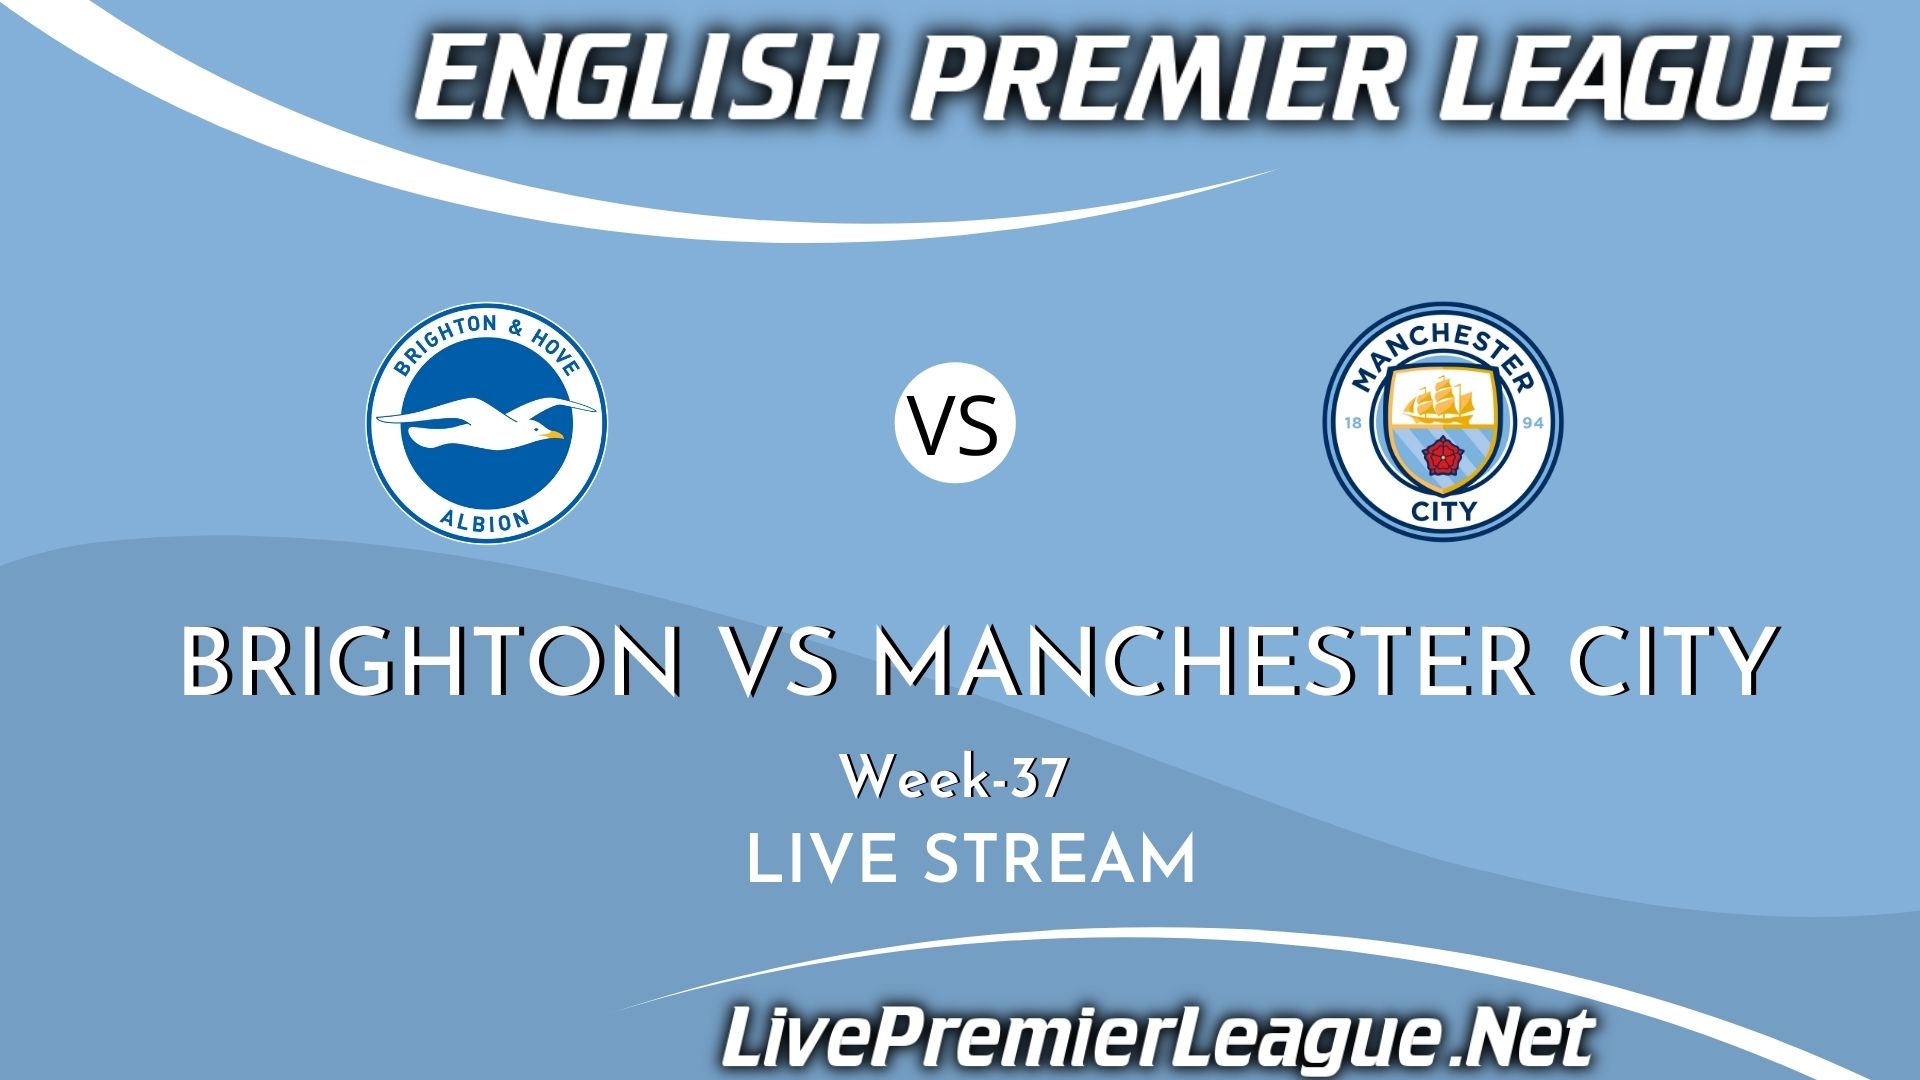 Brighton and Hove Albion Vs Manchester City Live Stream 2021 | EPL Week 37